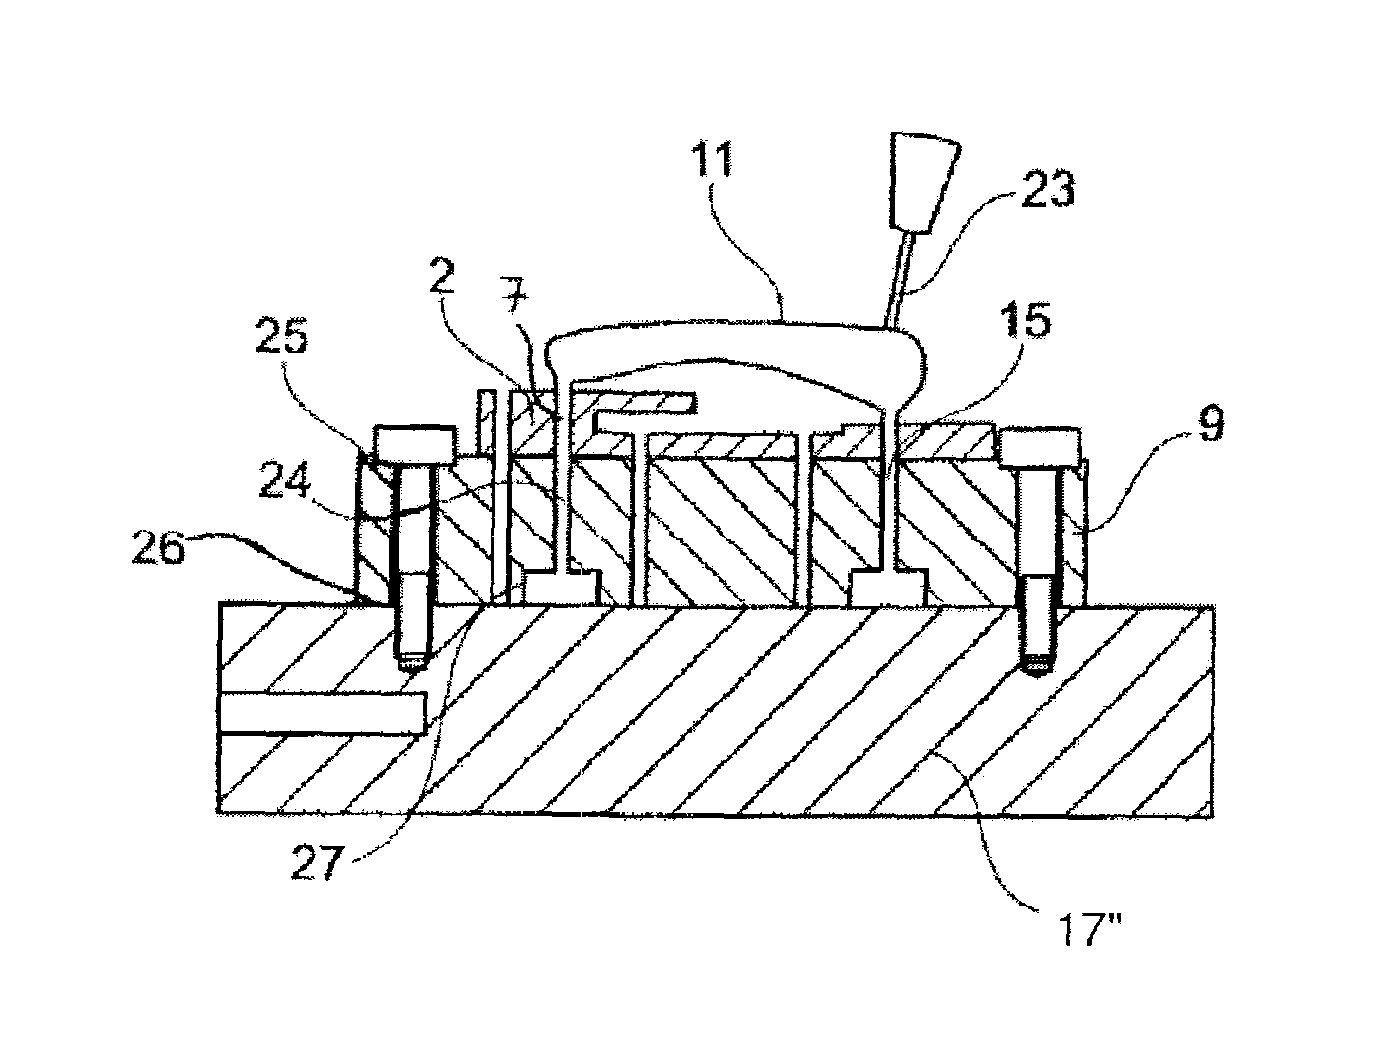 Injection molding method including machining of both injection mold and molded product